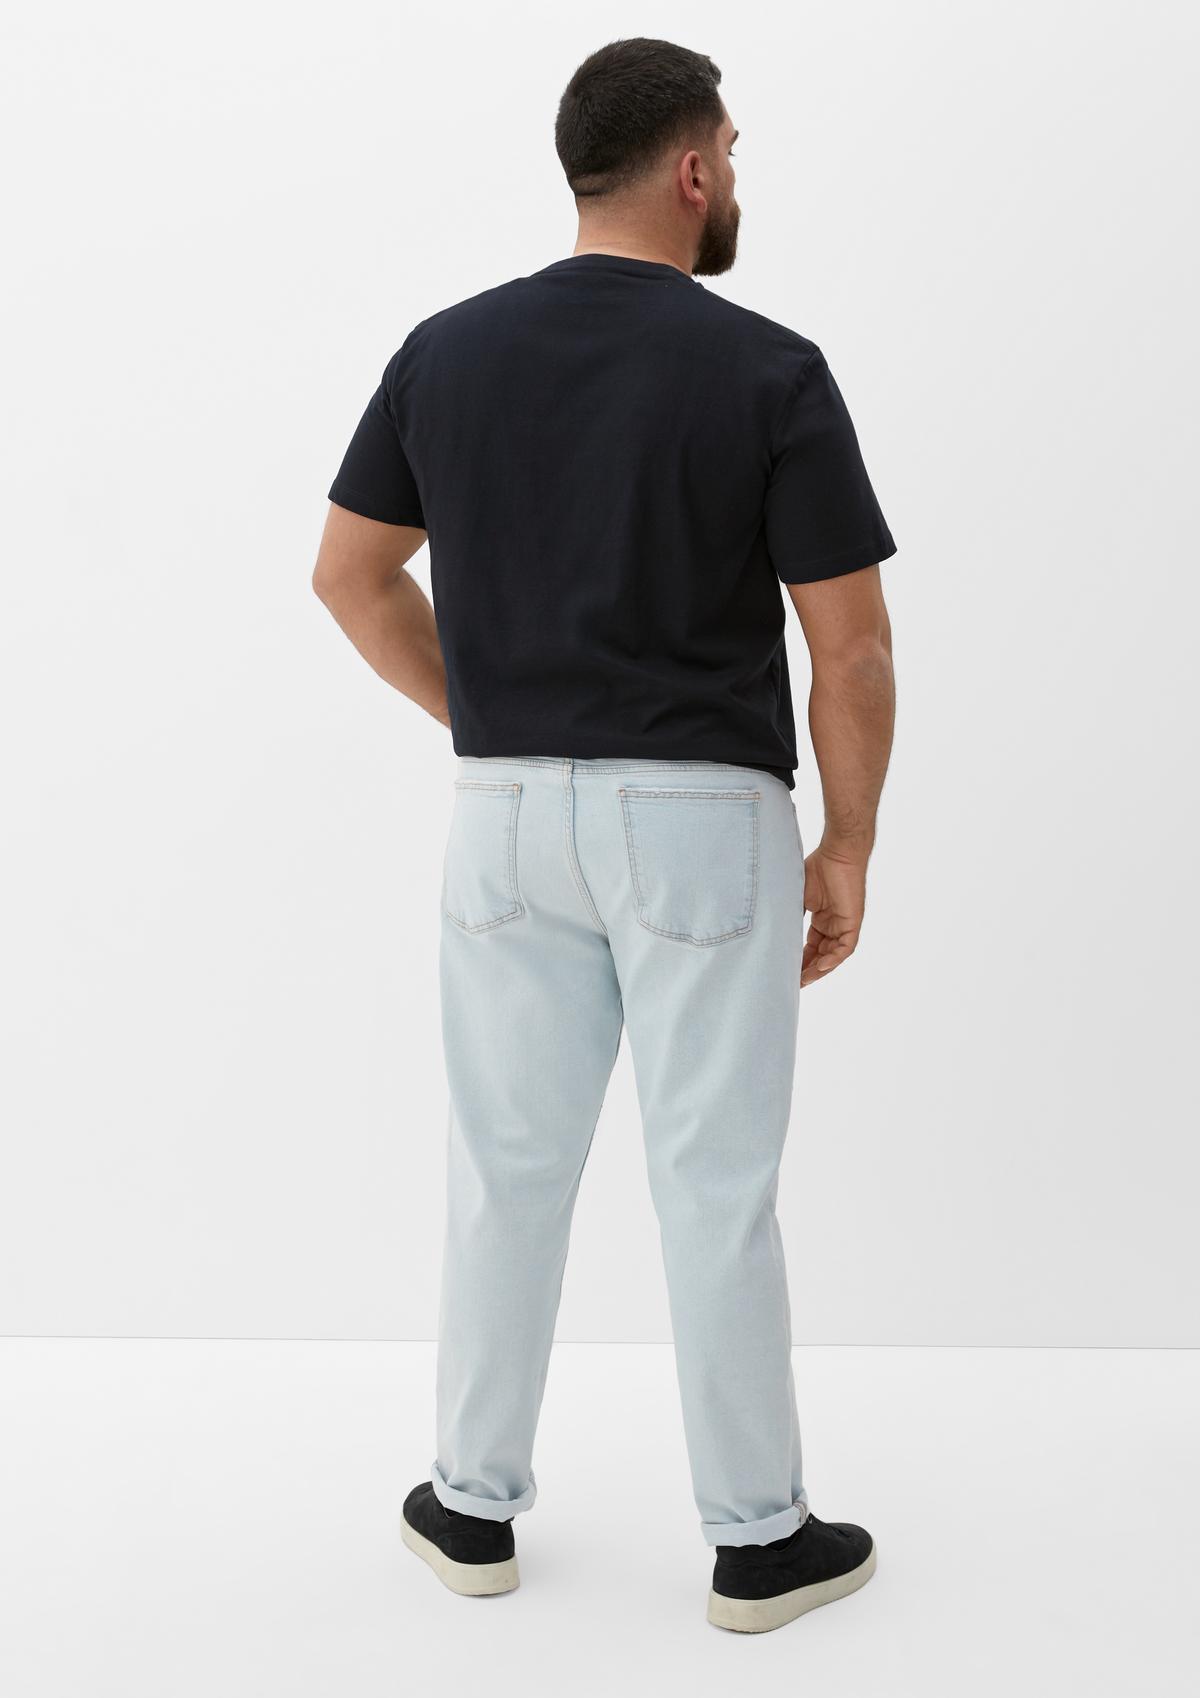 s.Oliver Jeans Casby / relaxed fit / mid rise / straight leg